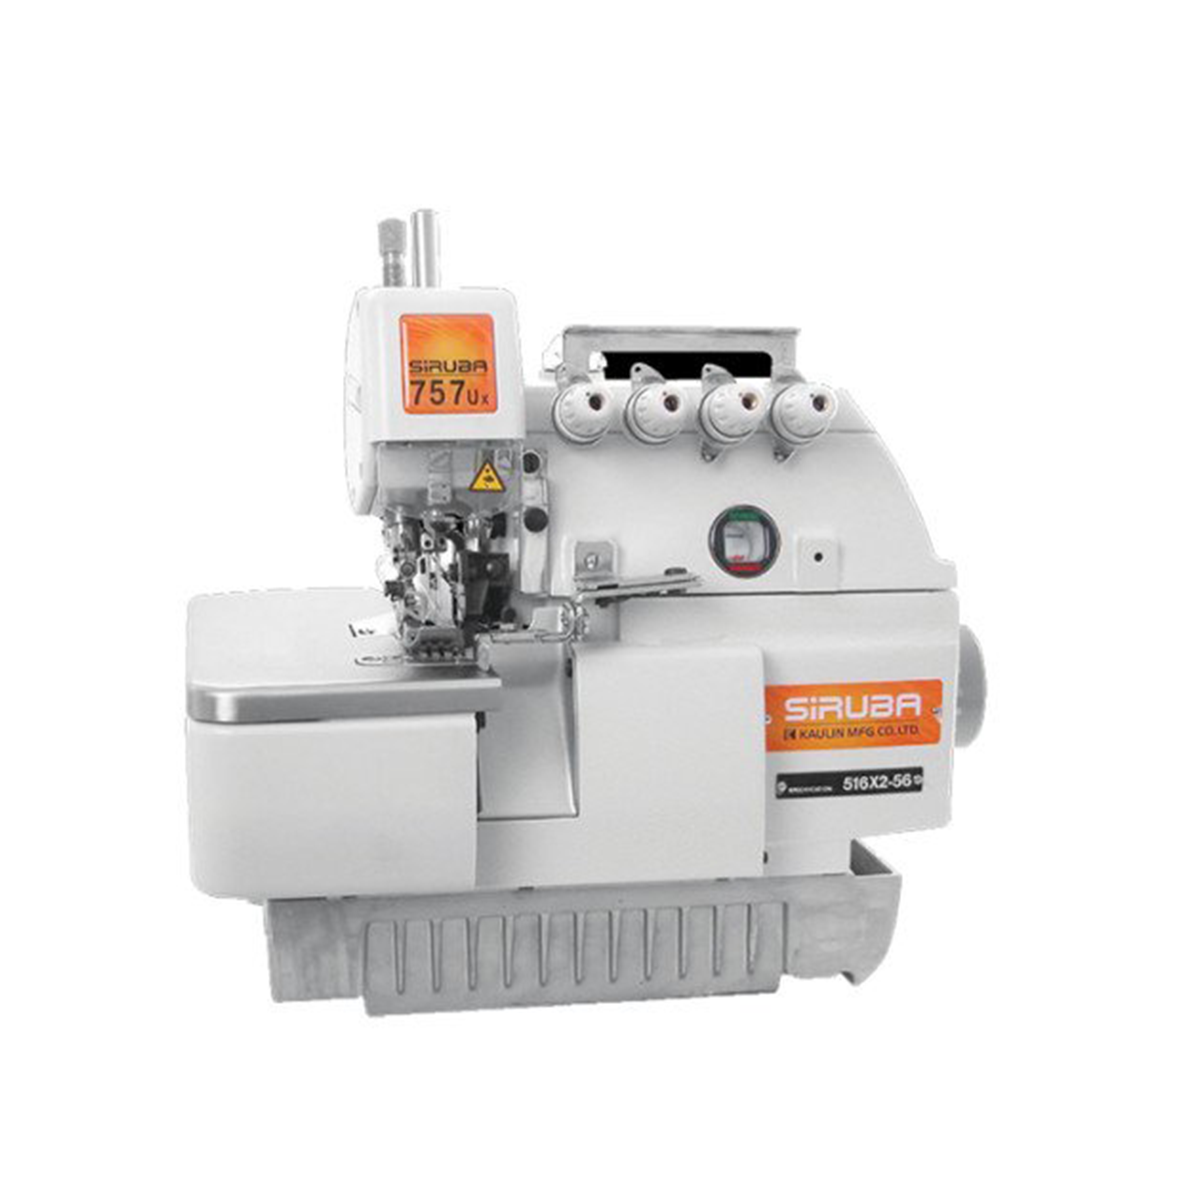 SIRUBA 757UX-516X2-56 5 5 Thread Overlock for Extra Heavy Materials Industrial Sewing Machine Assembled with Servo Motor, Fully Submerged Table Setup